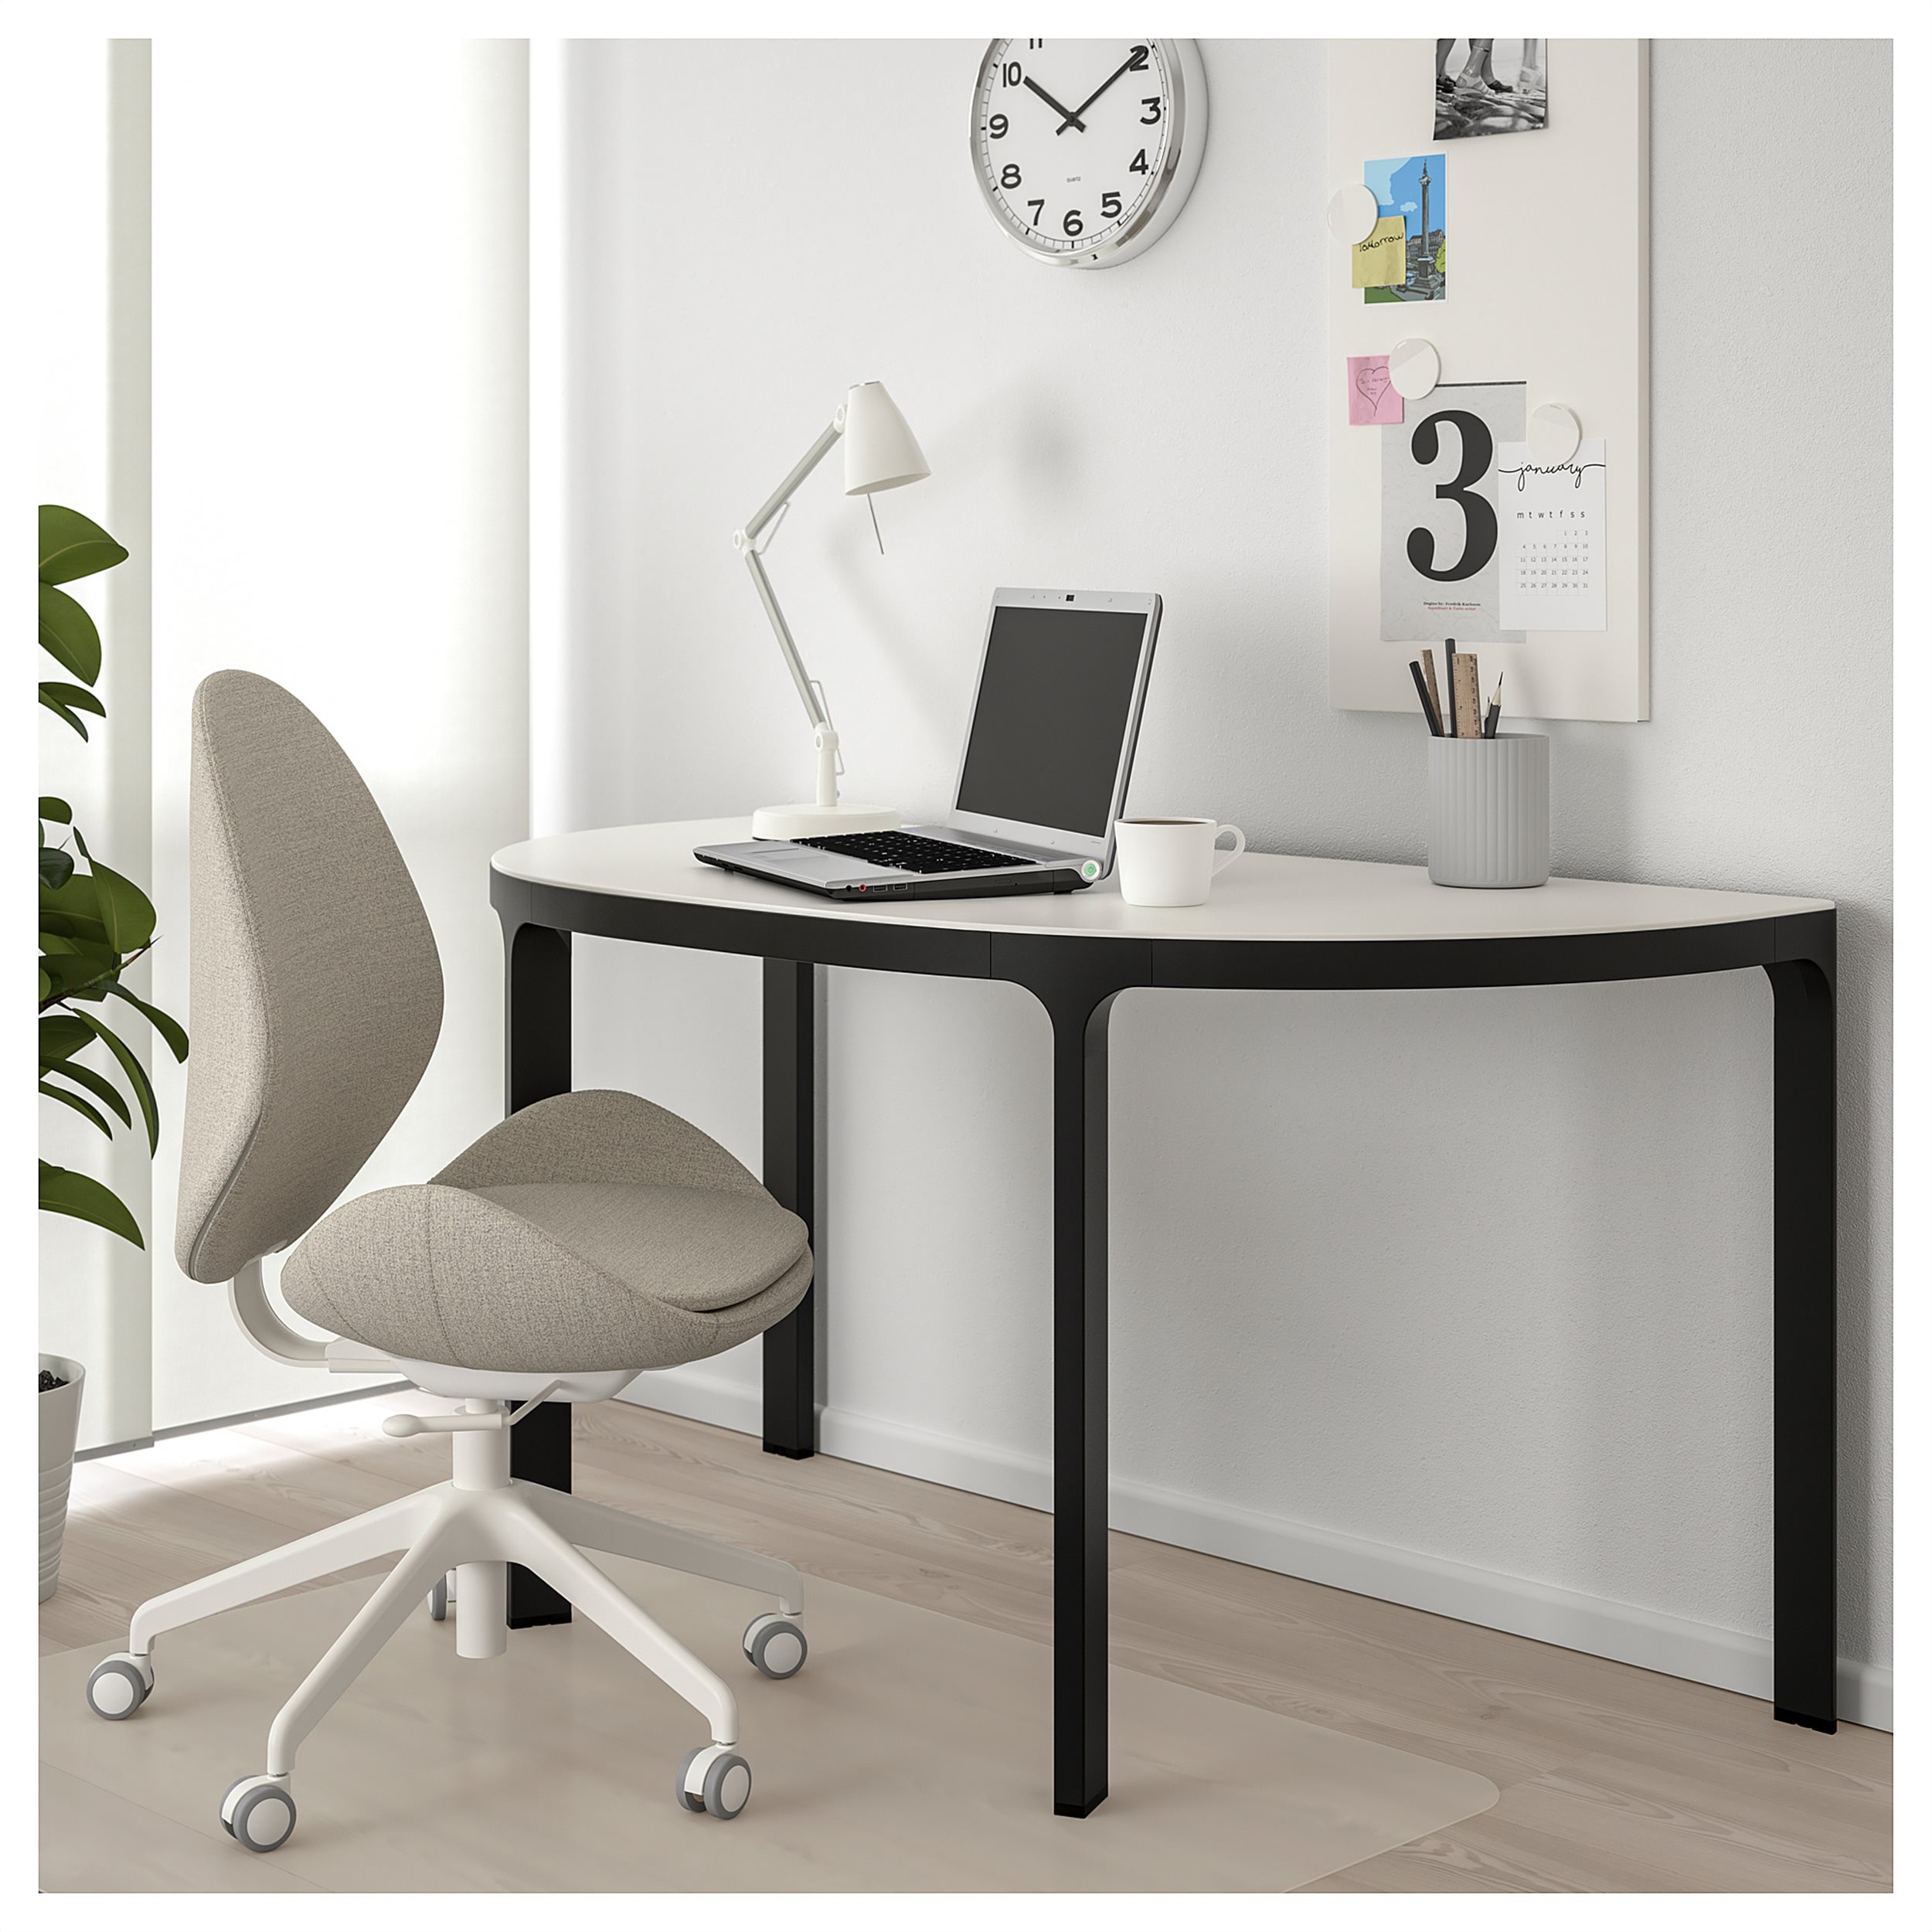 Curved Bekant Desk Ikea Instructions for Small Room